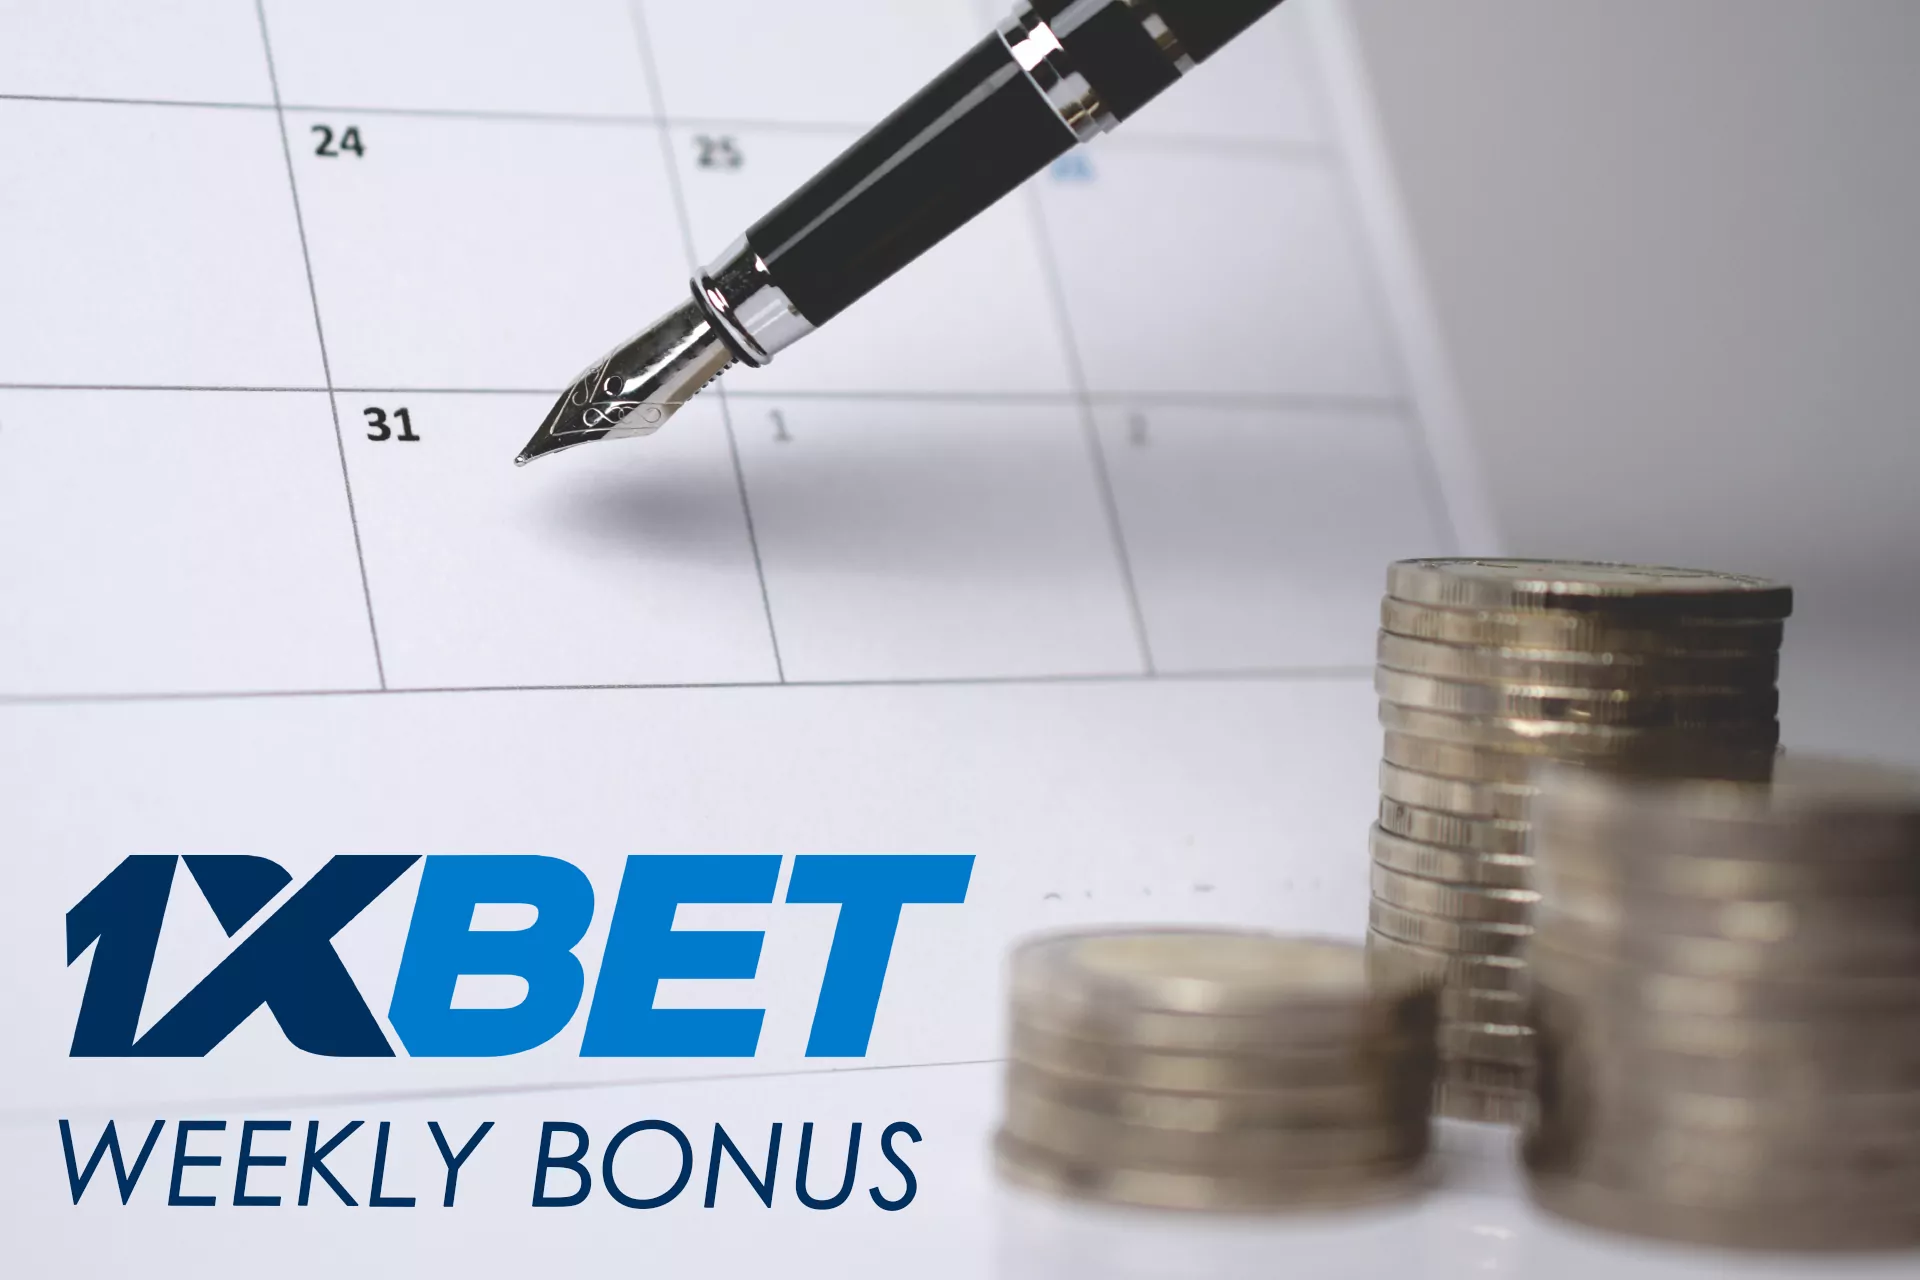 Weekly bonus available to all 1xBet users up to INR 5,000.